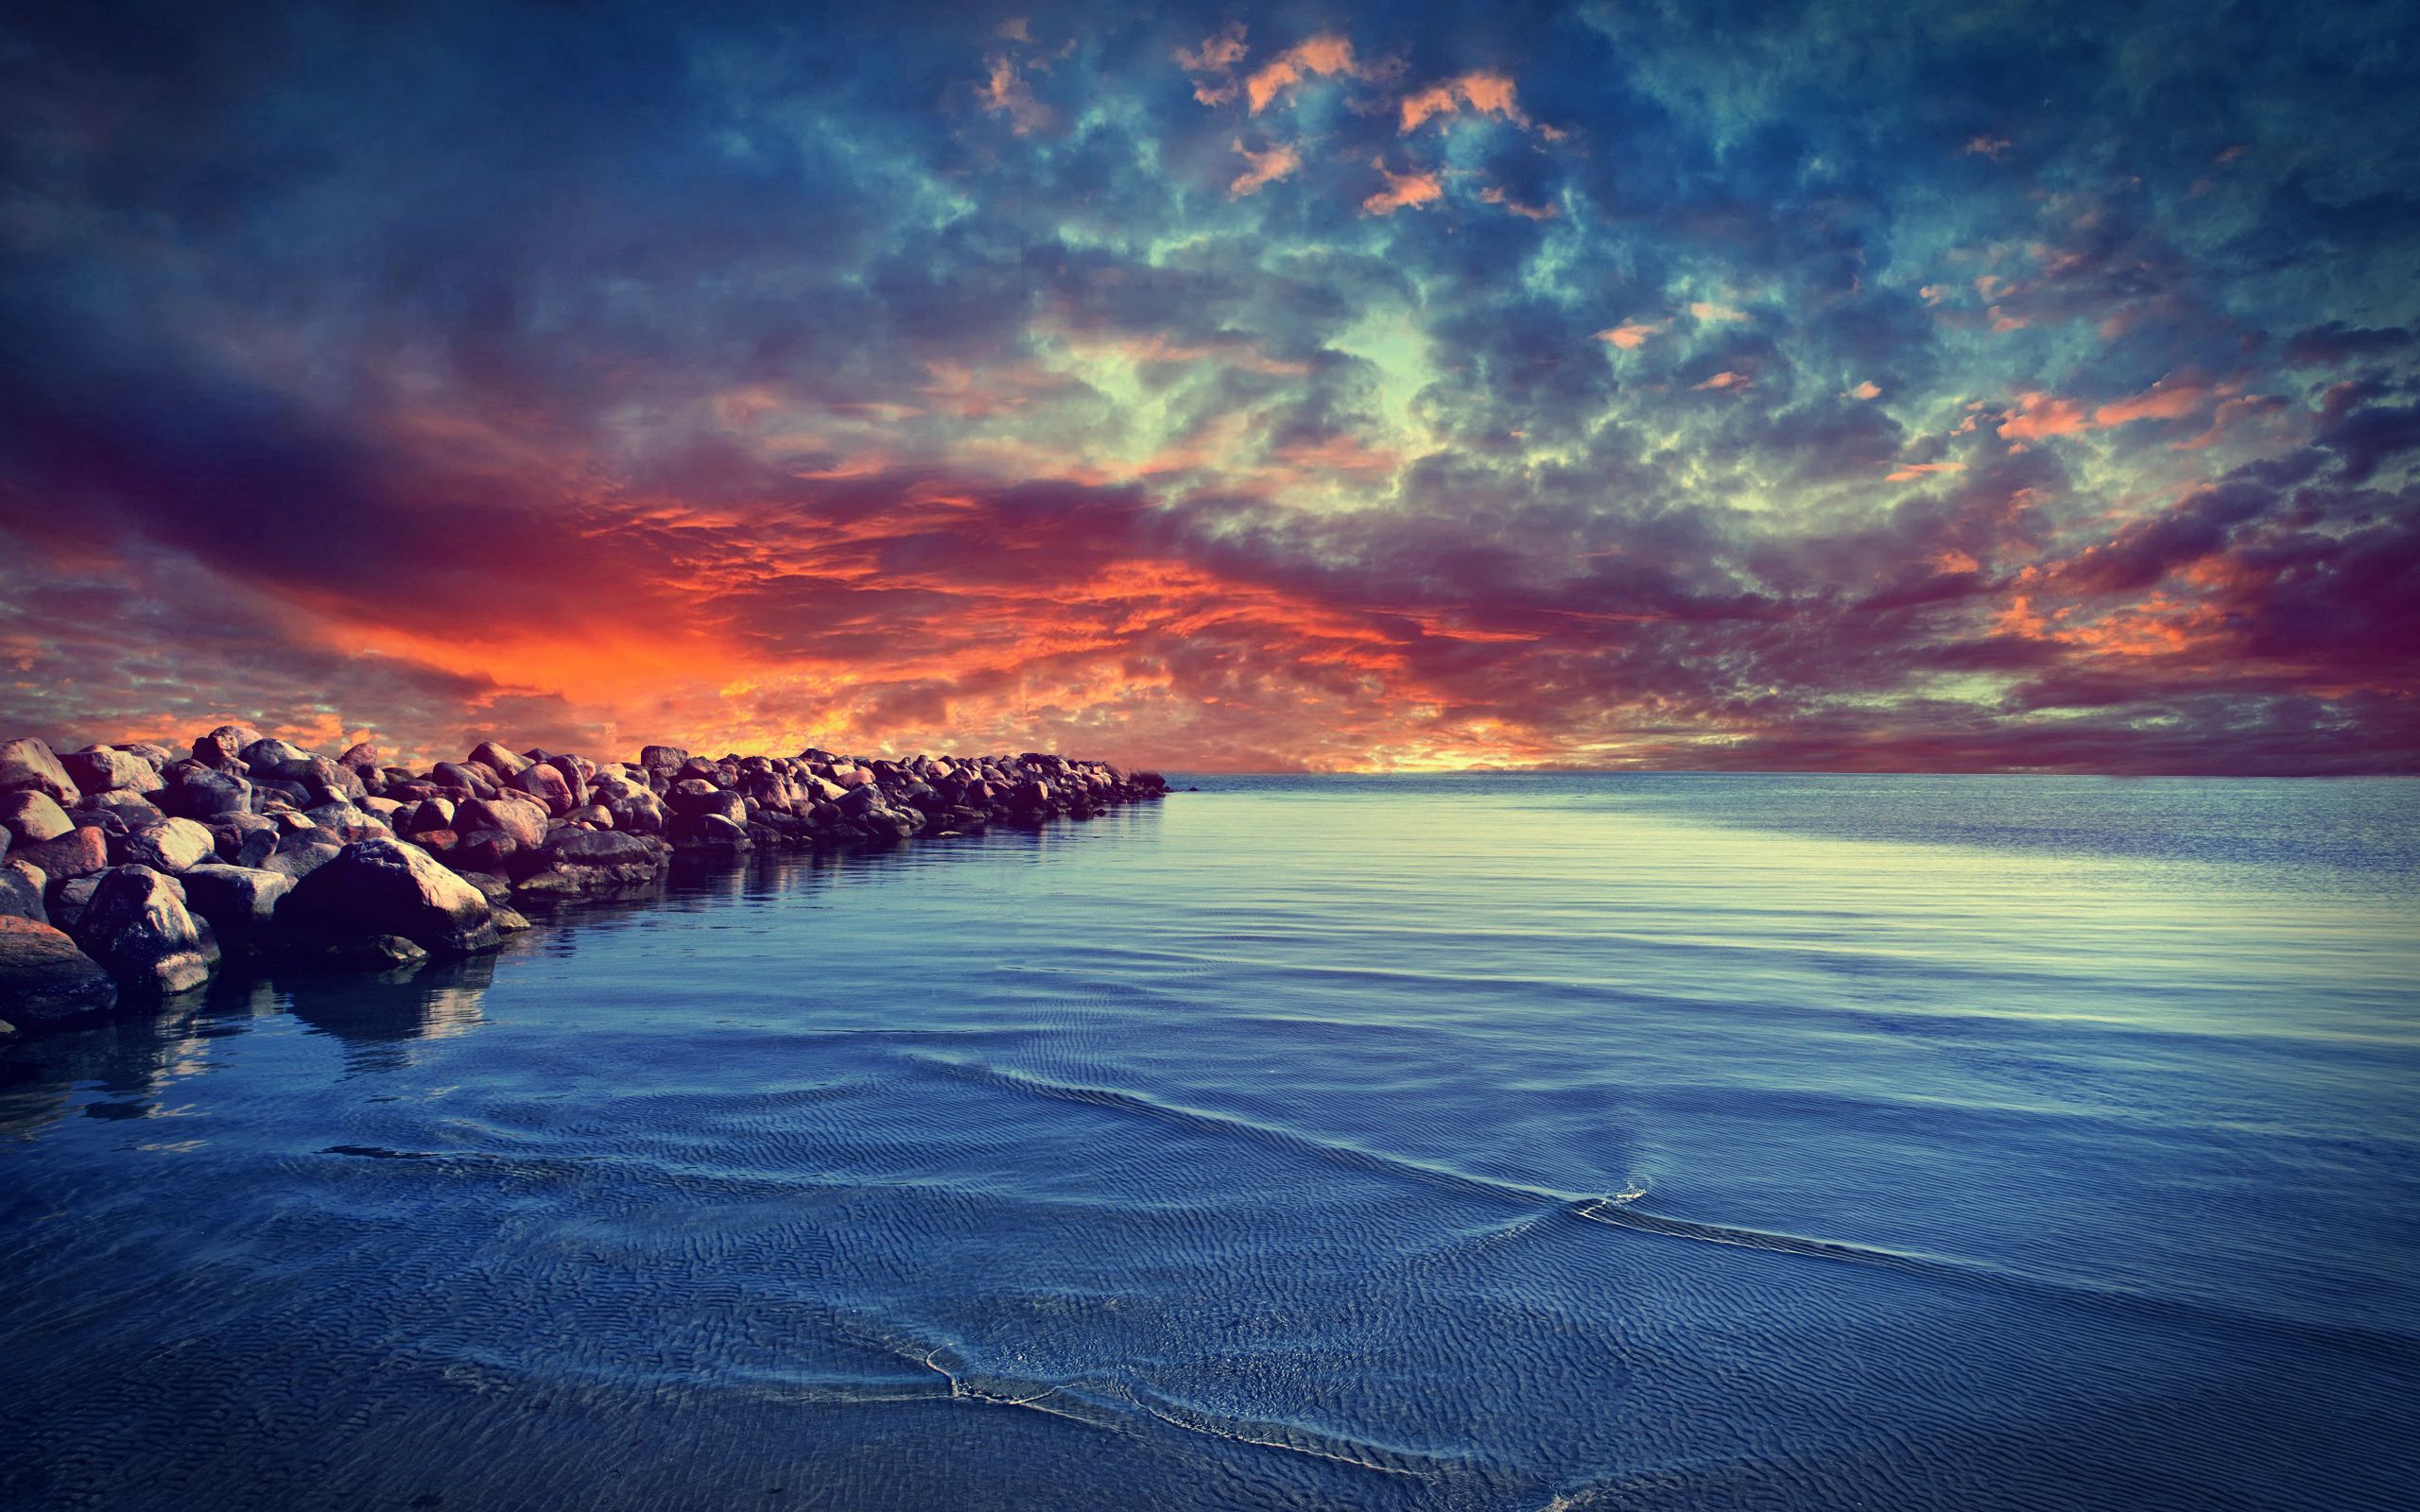 breakwater, sunset, nature, water, stones, sea, clouds, horizon, divorces, construction, evening, bottom, finely